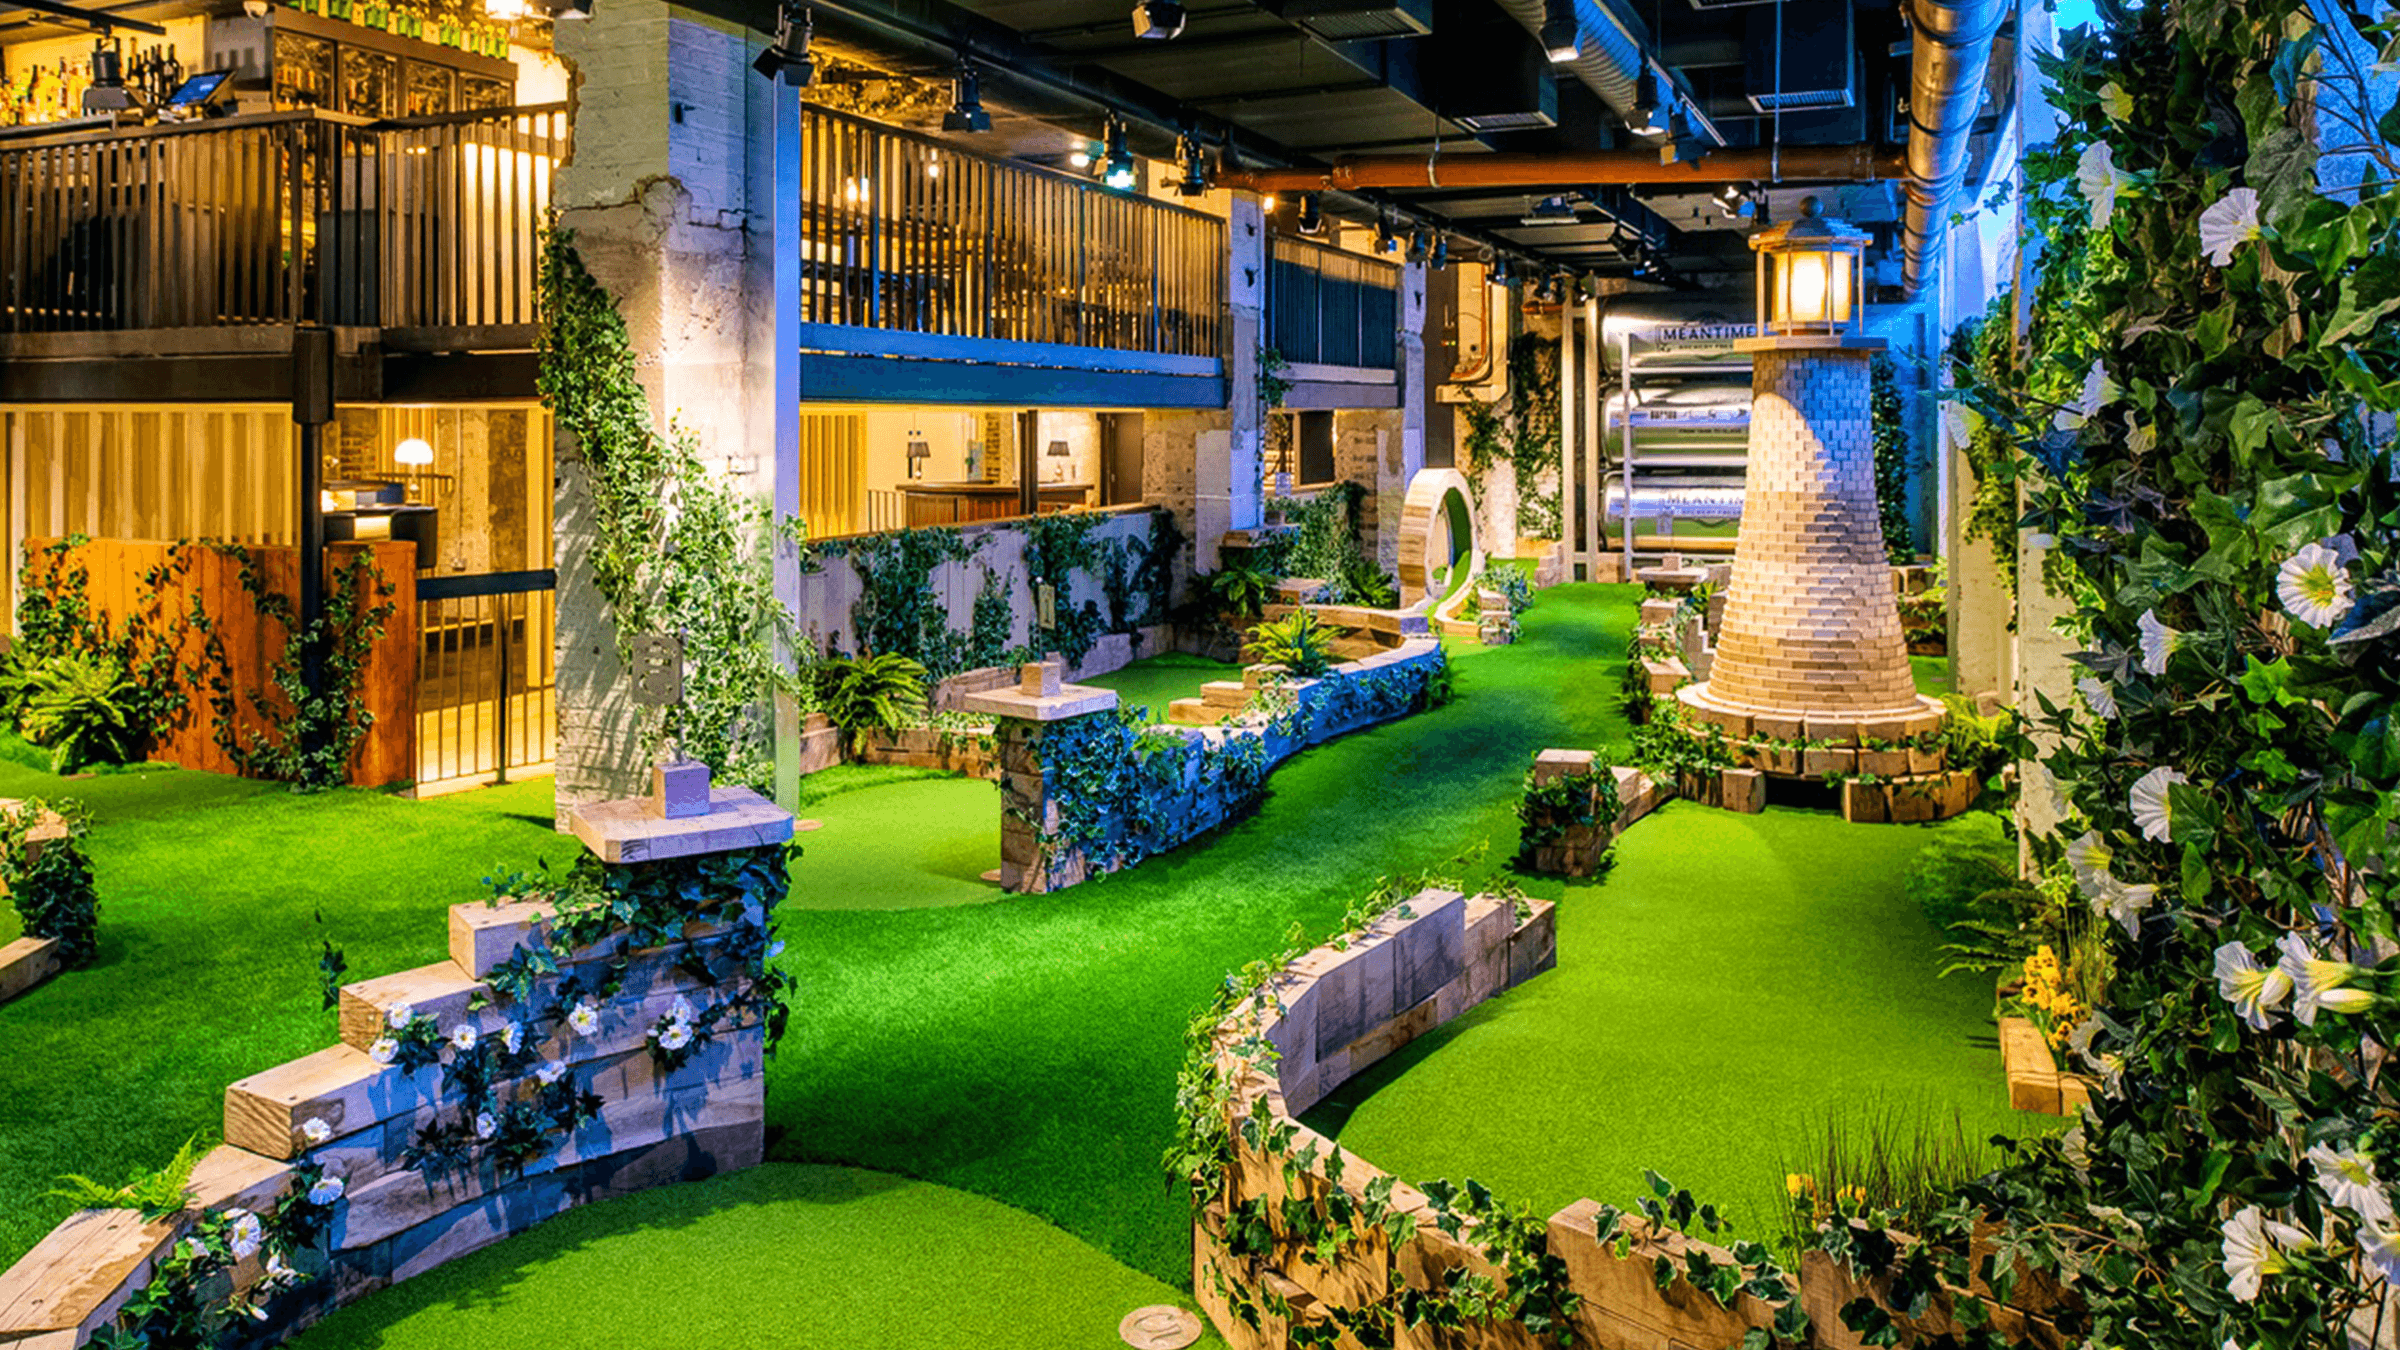 an interior image of the Swingers Crazy Golf bar in the City of London